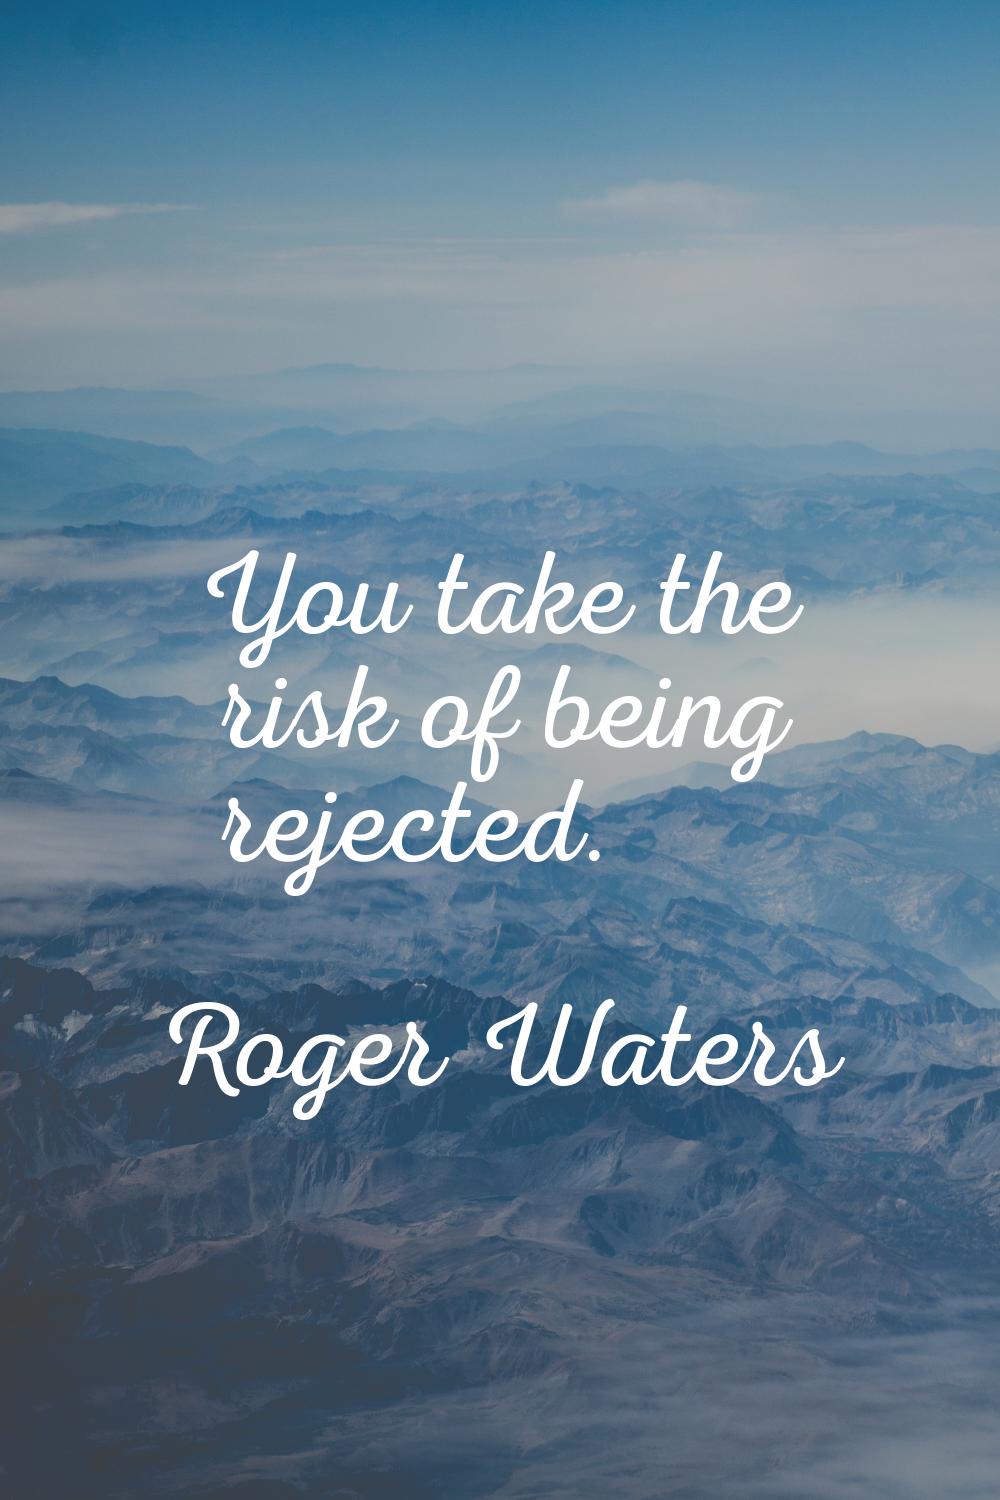 You take the risk of being rejected.